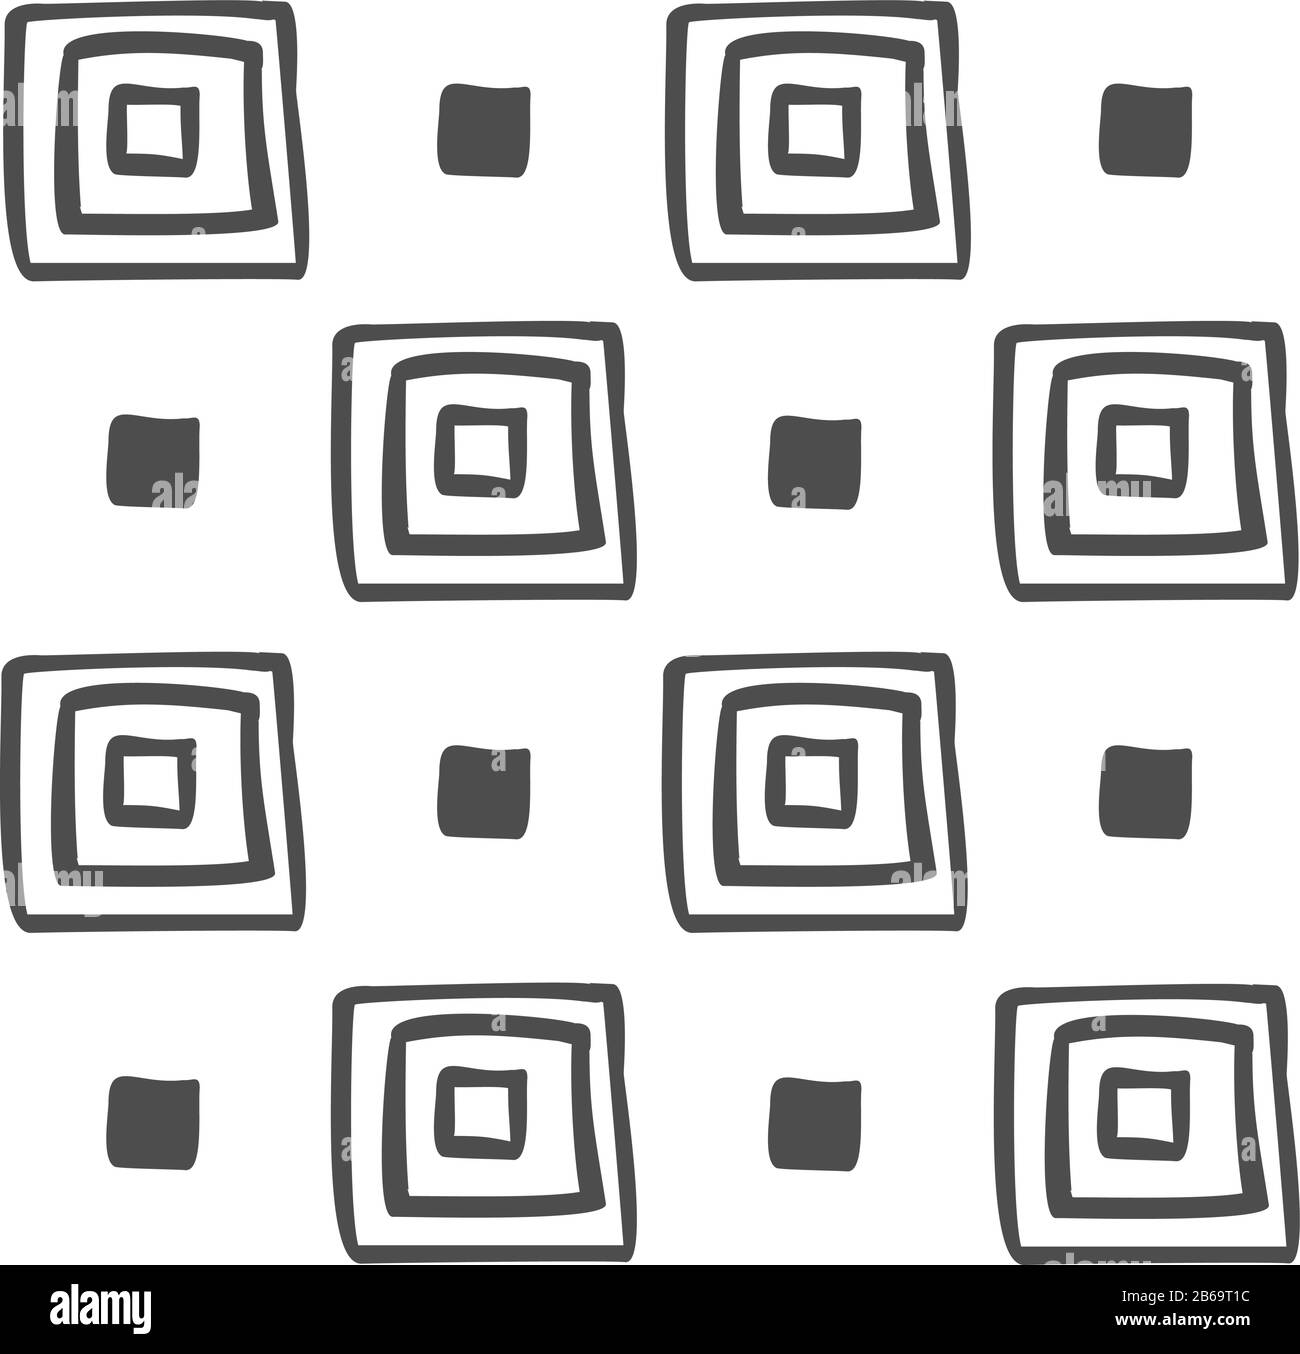 Vector seamless black and white geometric pattern of hand-drawn squares of different sizes. On white background . For decor, textile, wrapping, fabric Stock Vector